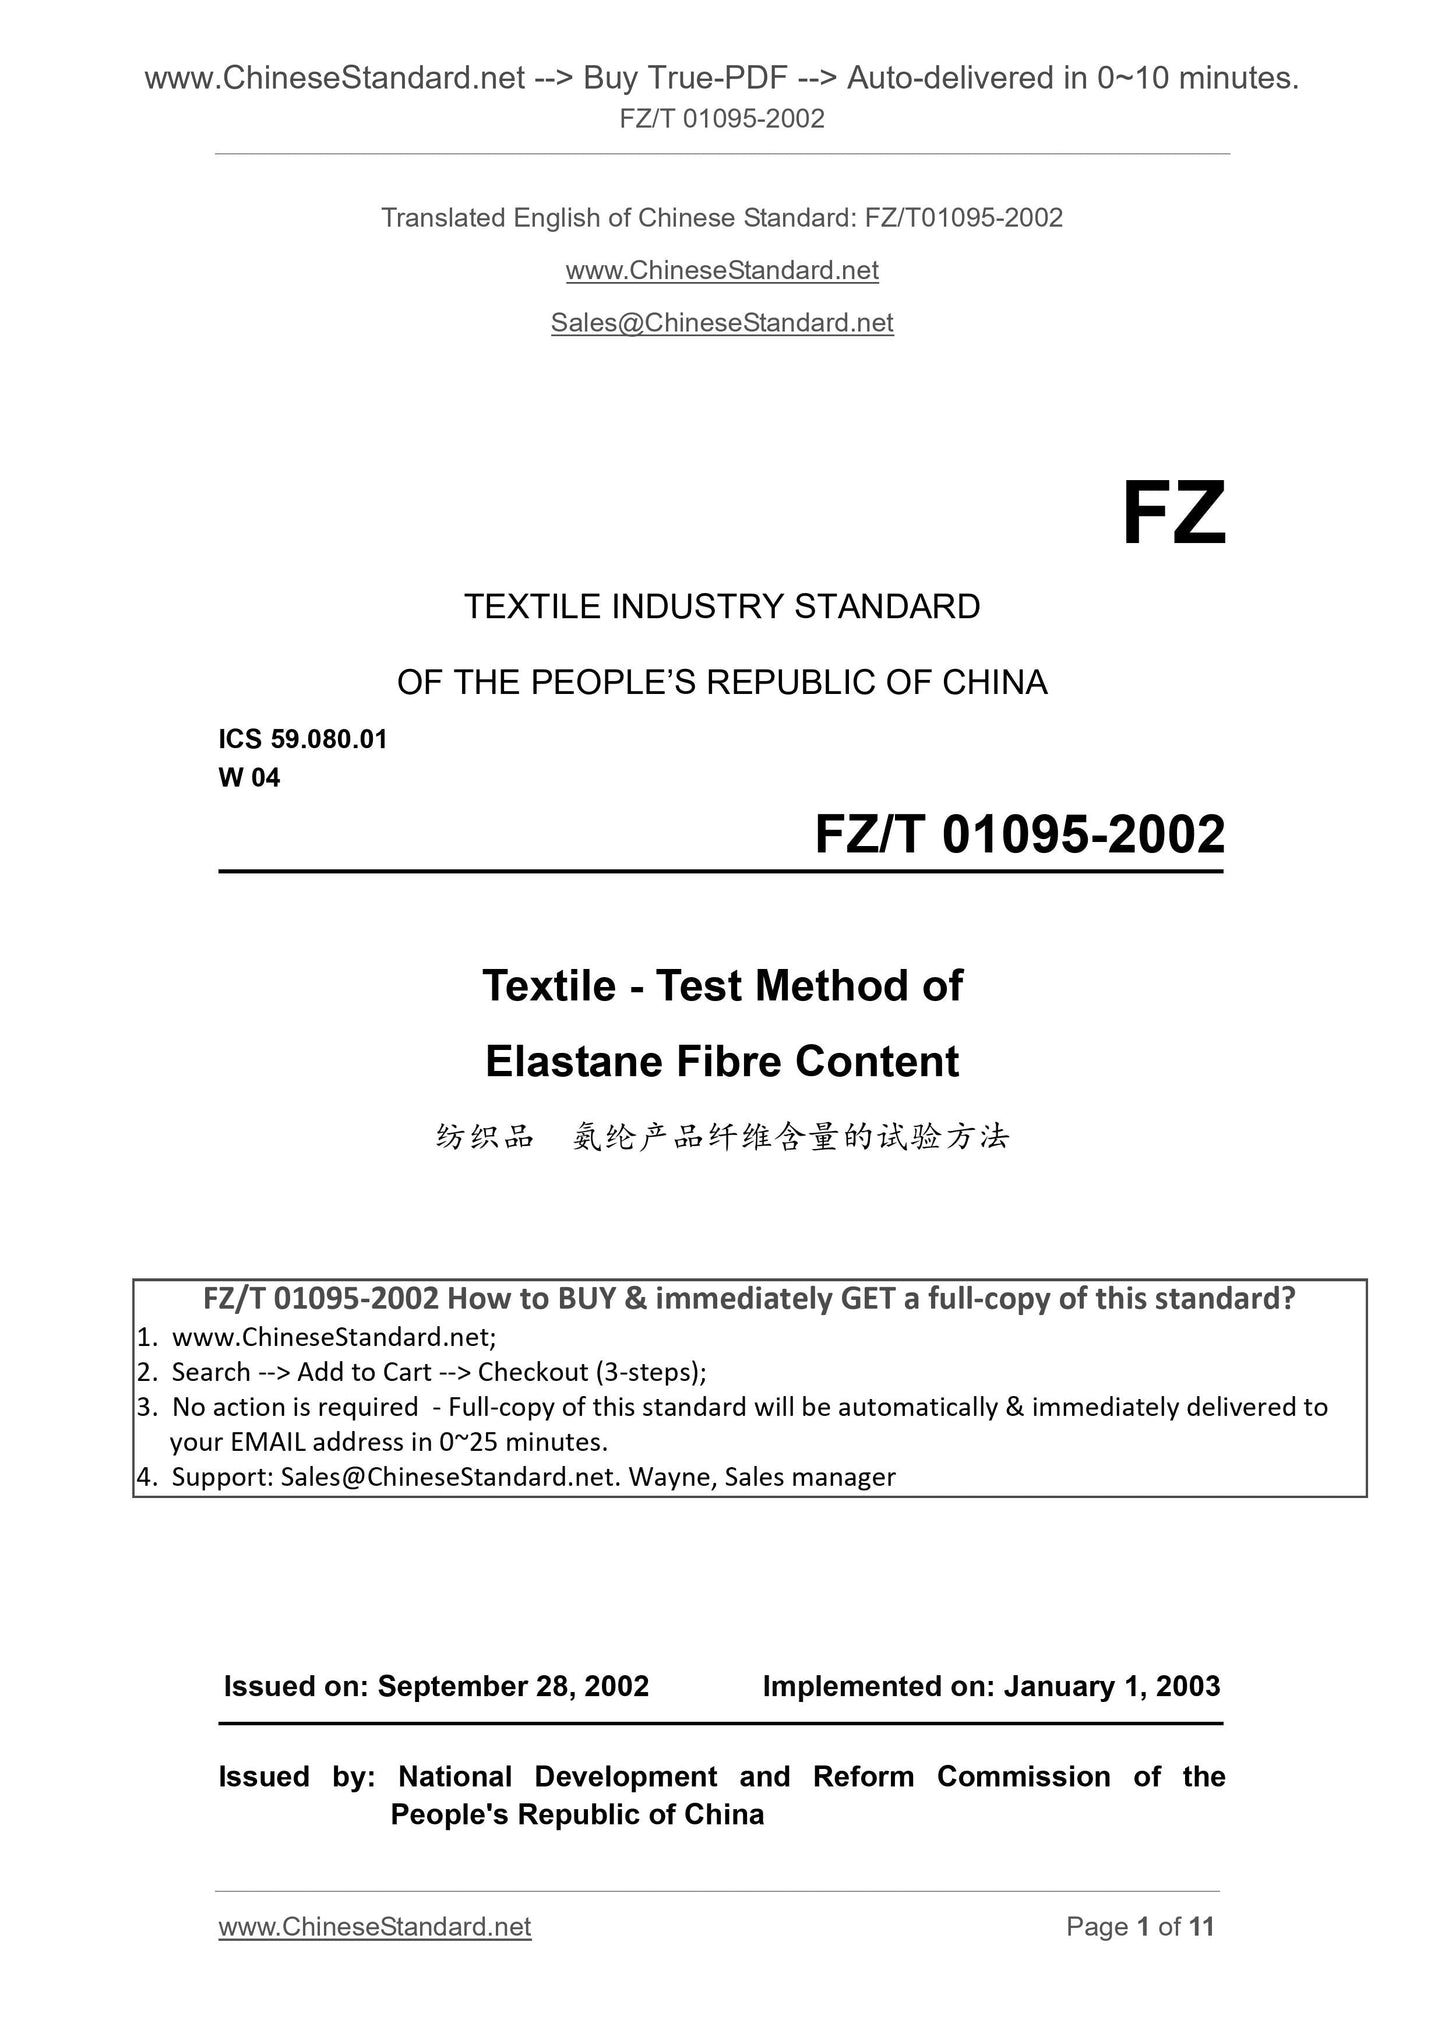 FZ/T 01095-2002 Page 1